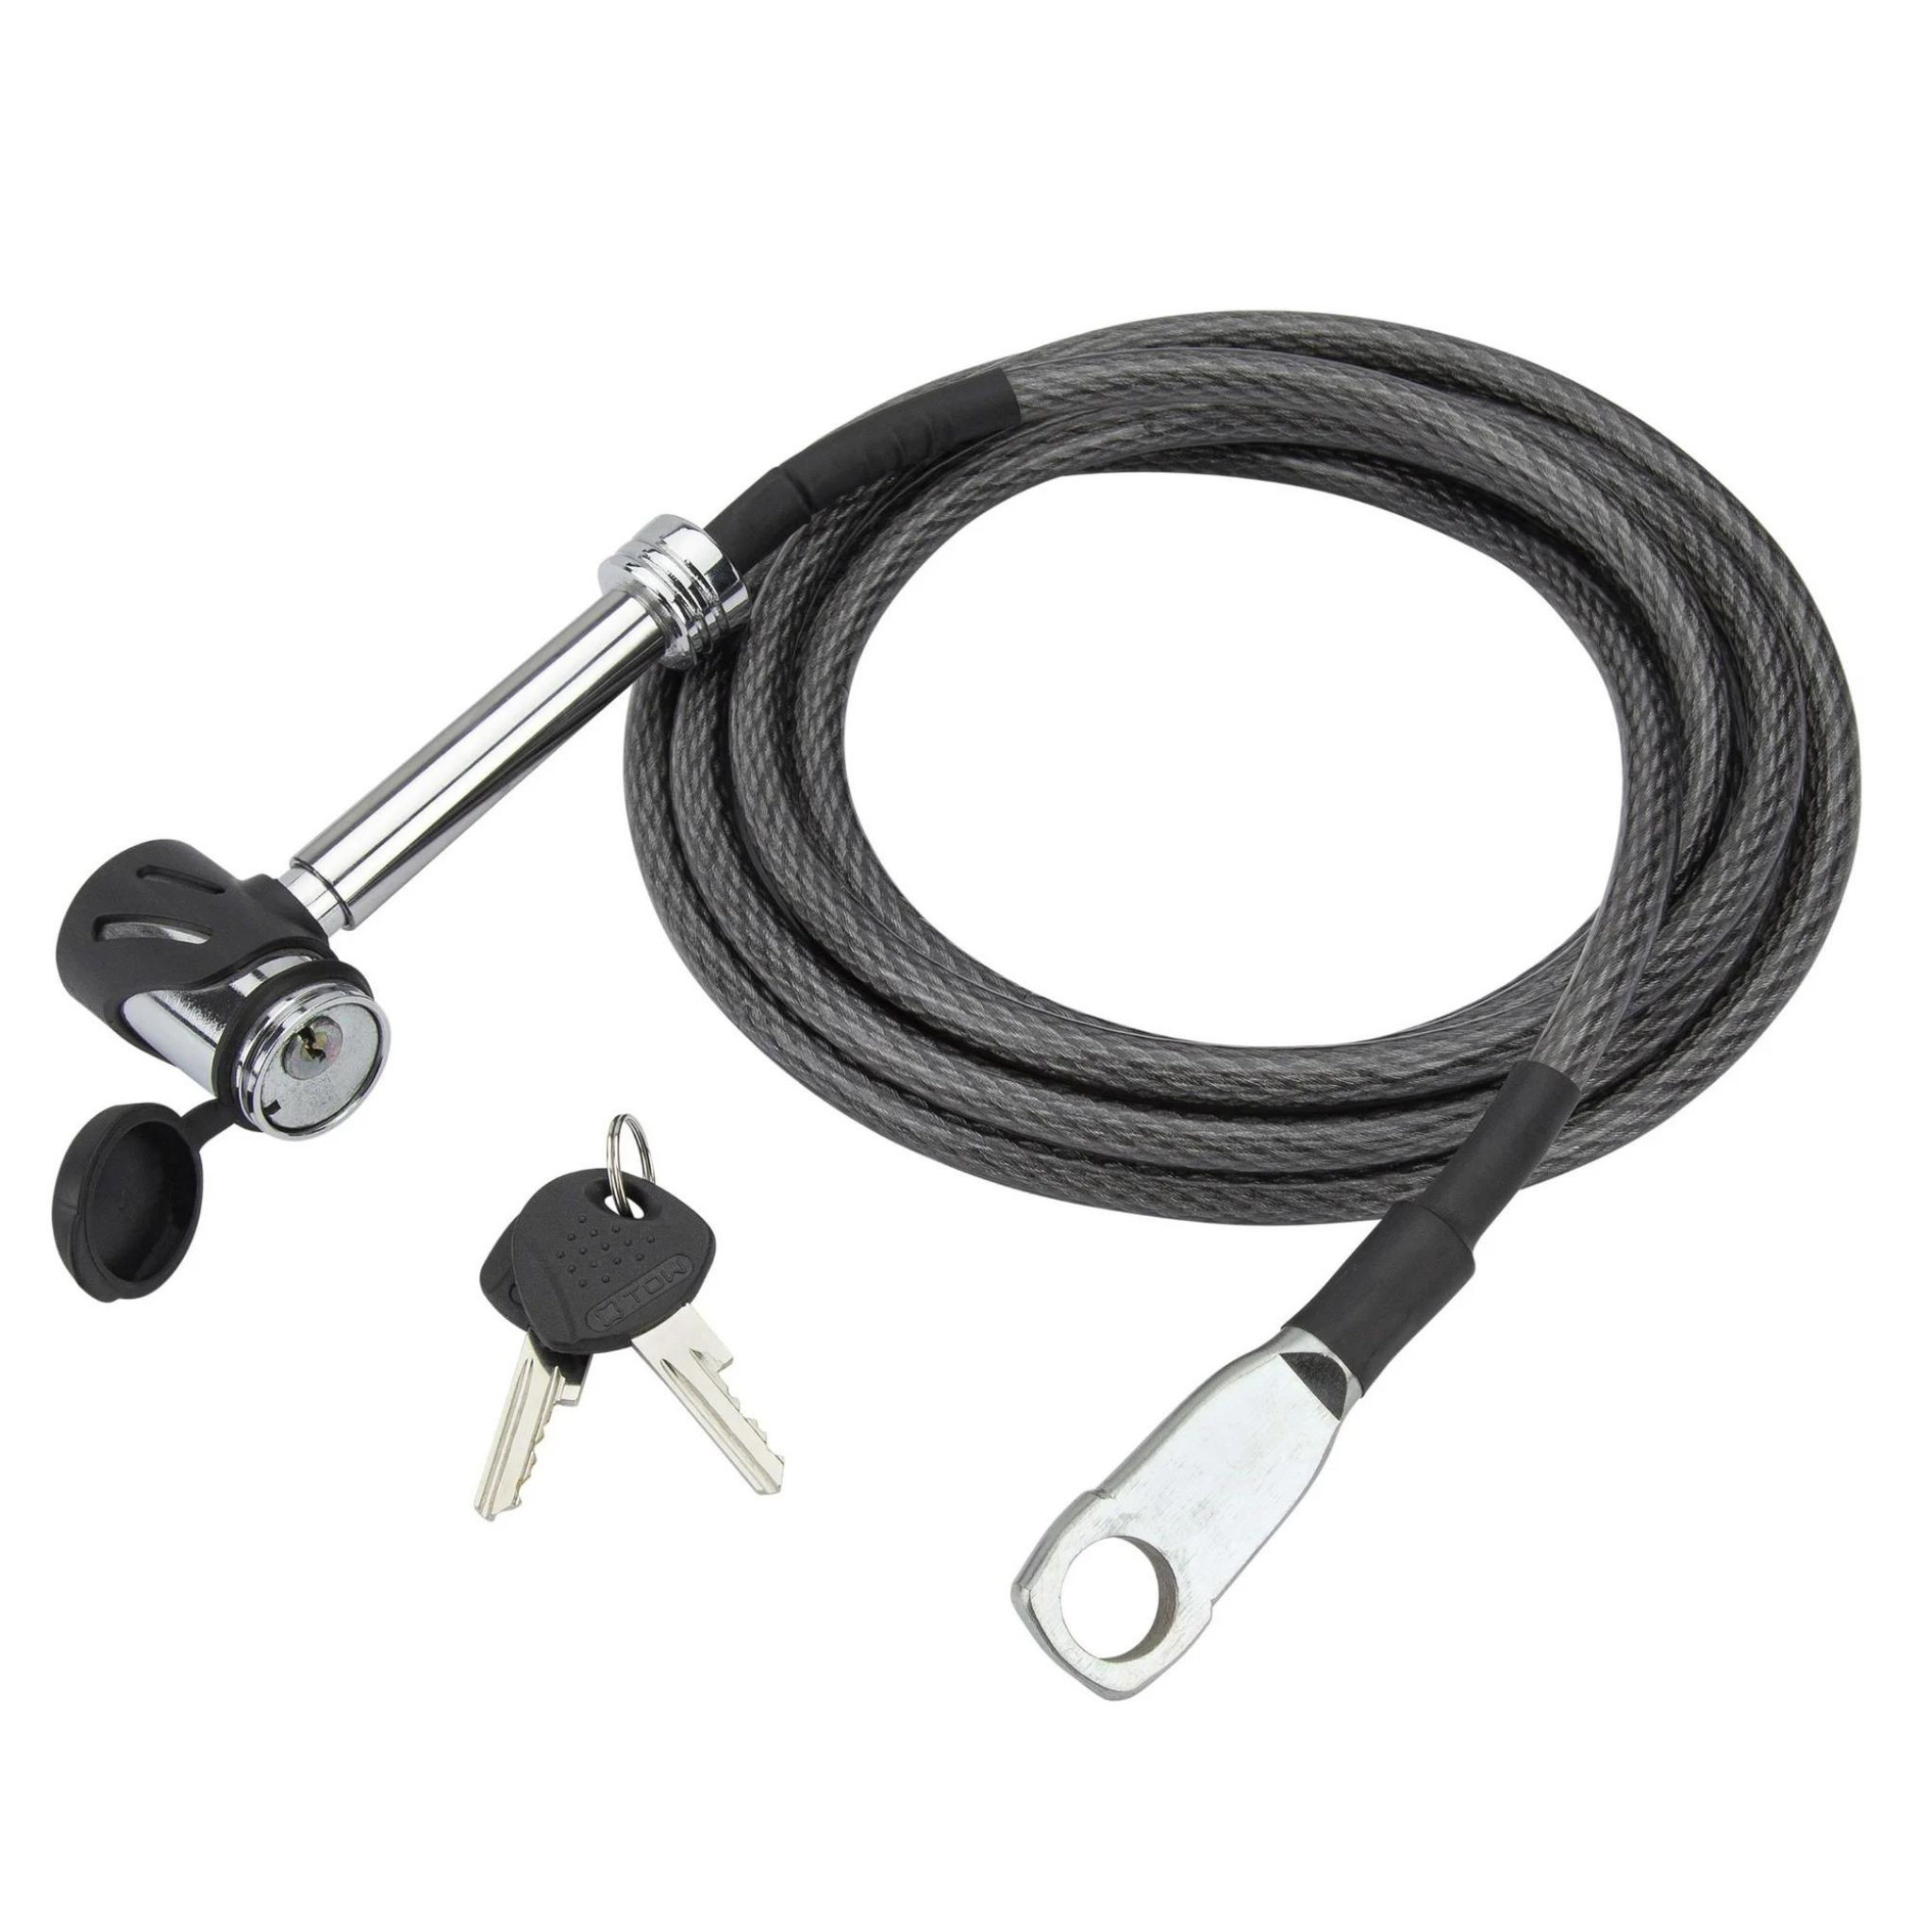 TowSmart 784 12ft Braided Steel Cable with Hitch Lock